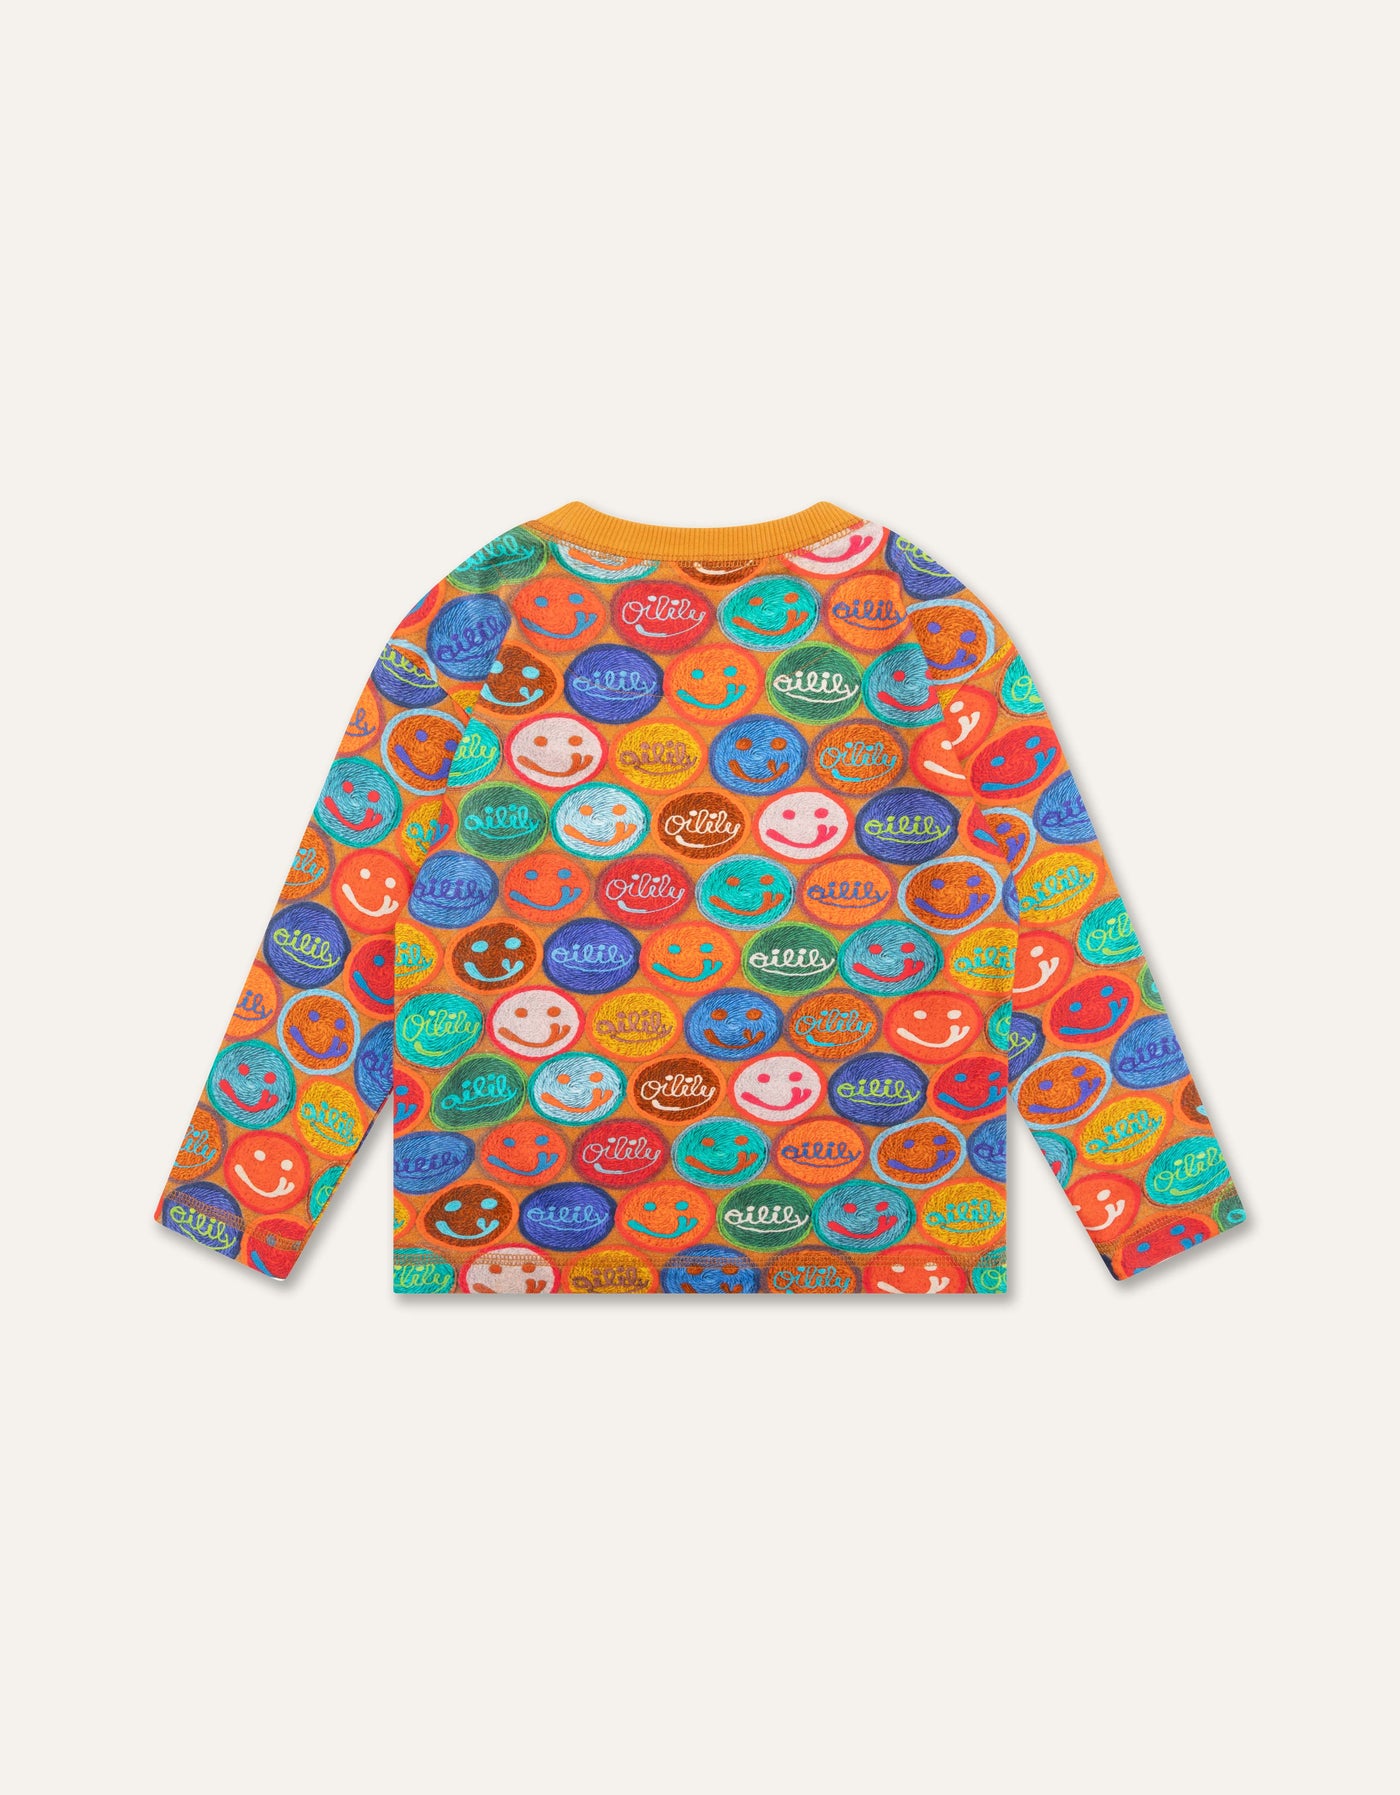 Boys Thommy Smiley Logo T-shirt by Oilily